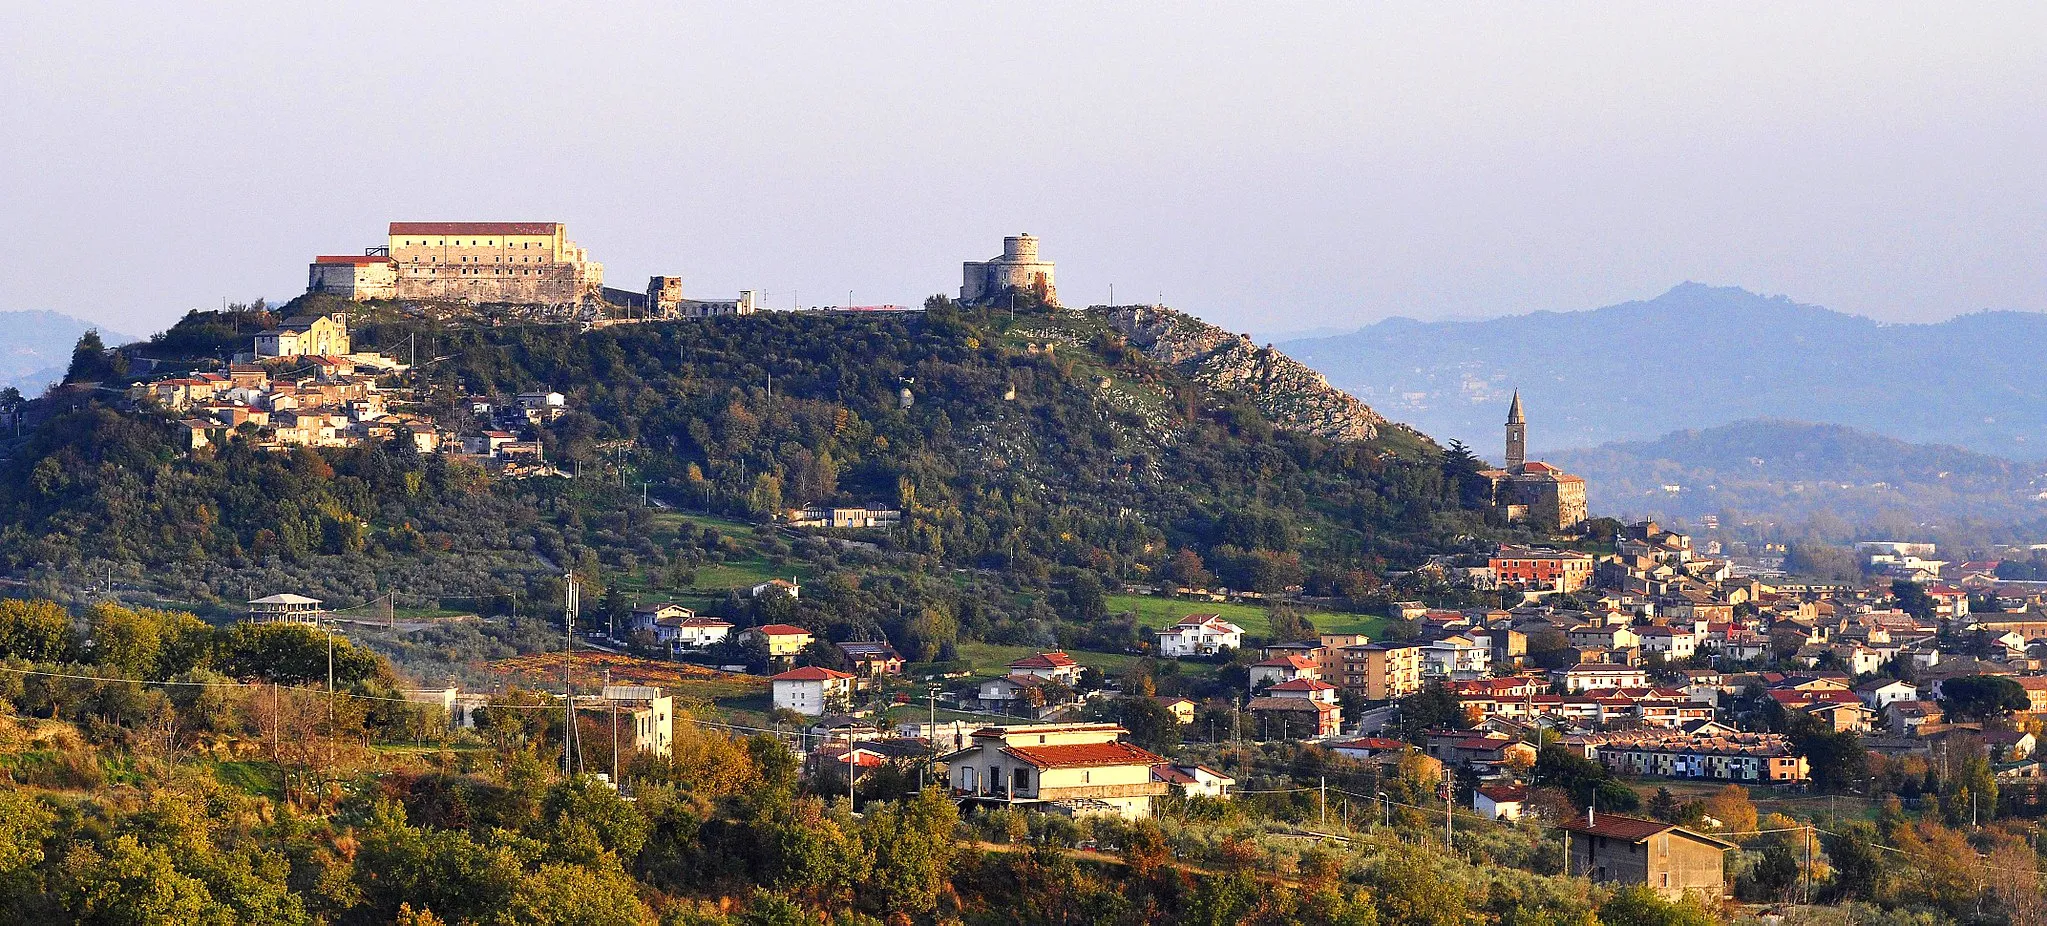 Photo showing: A view of Montesarchio, a comune in the province of Benevento.